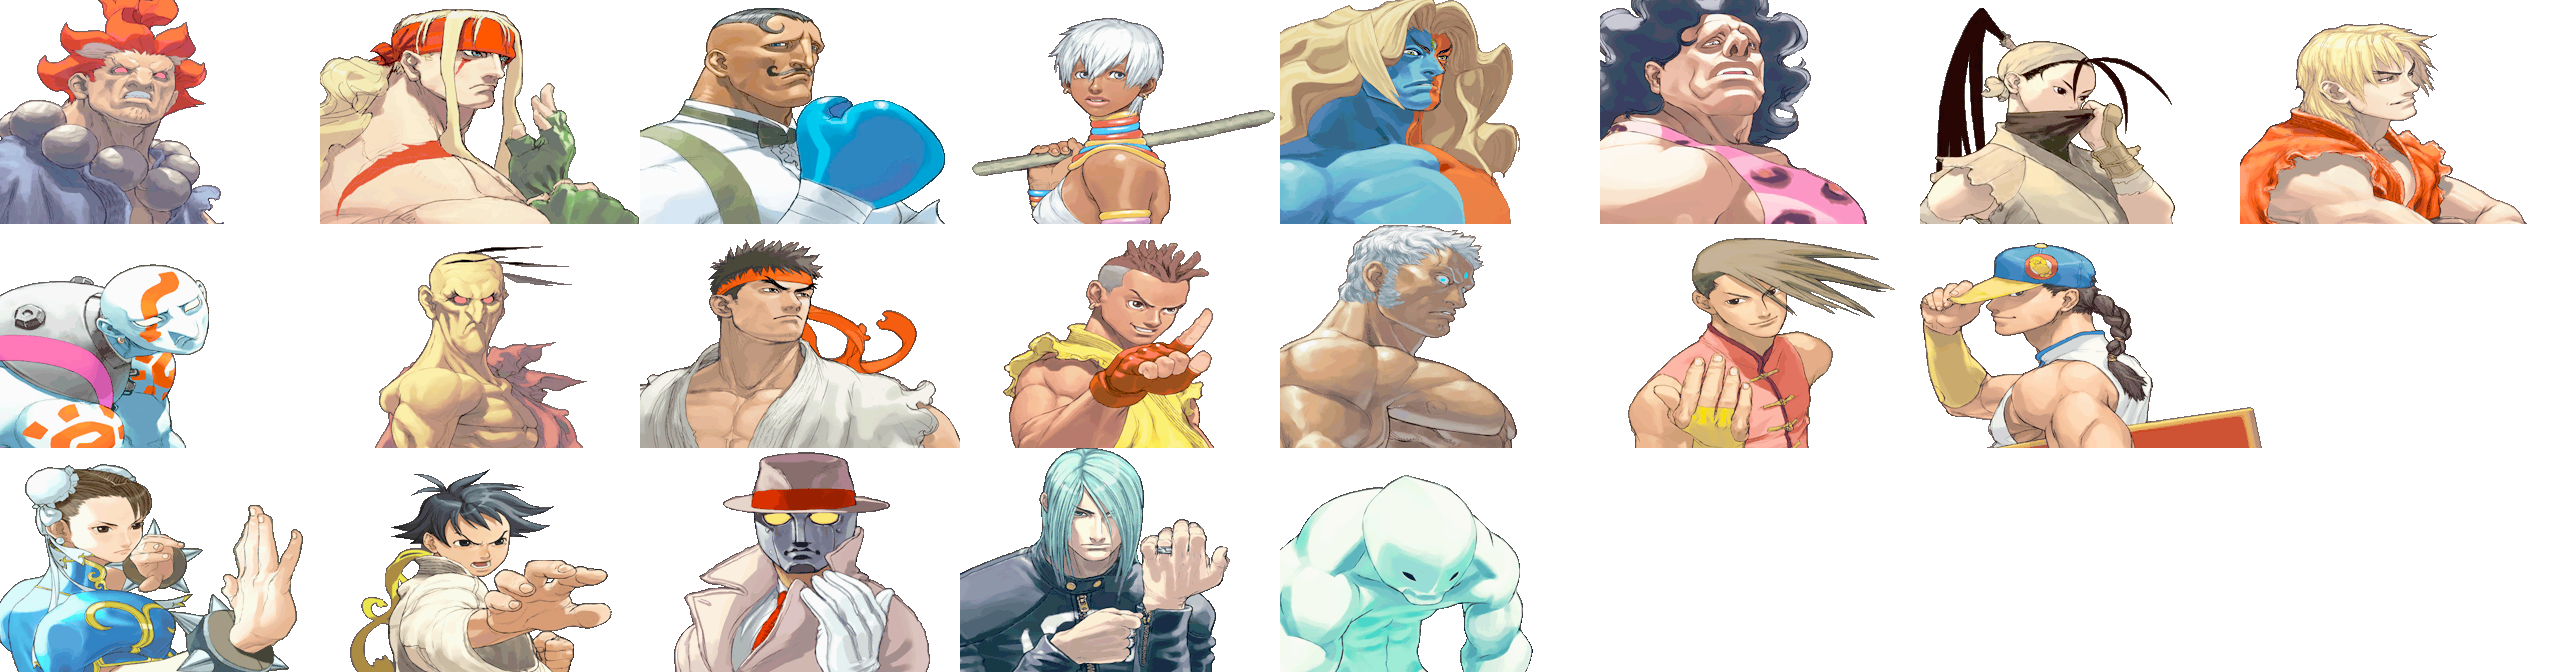 Street Fighter III Third Strike DC, Characters.png